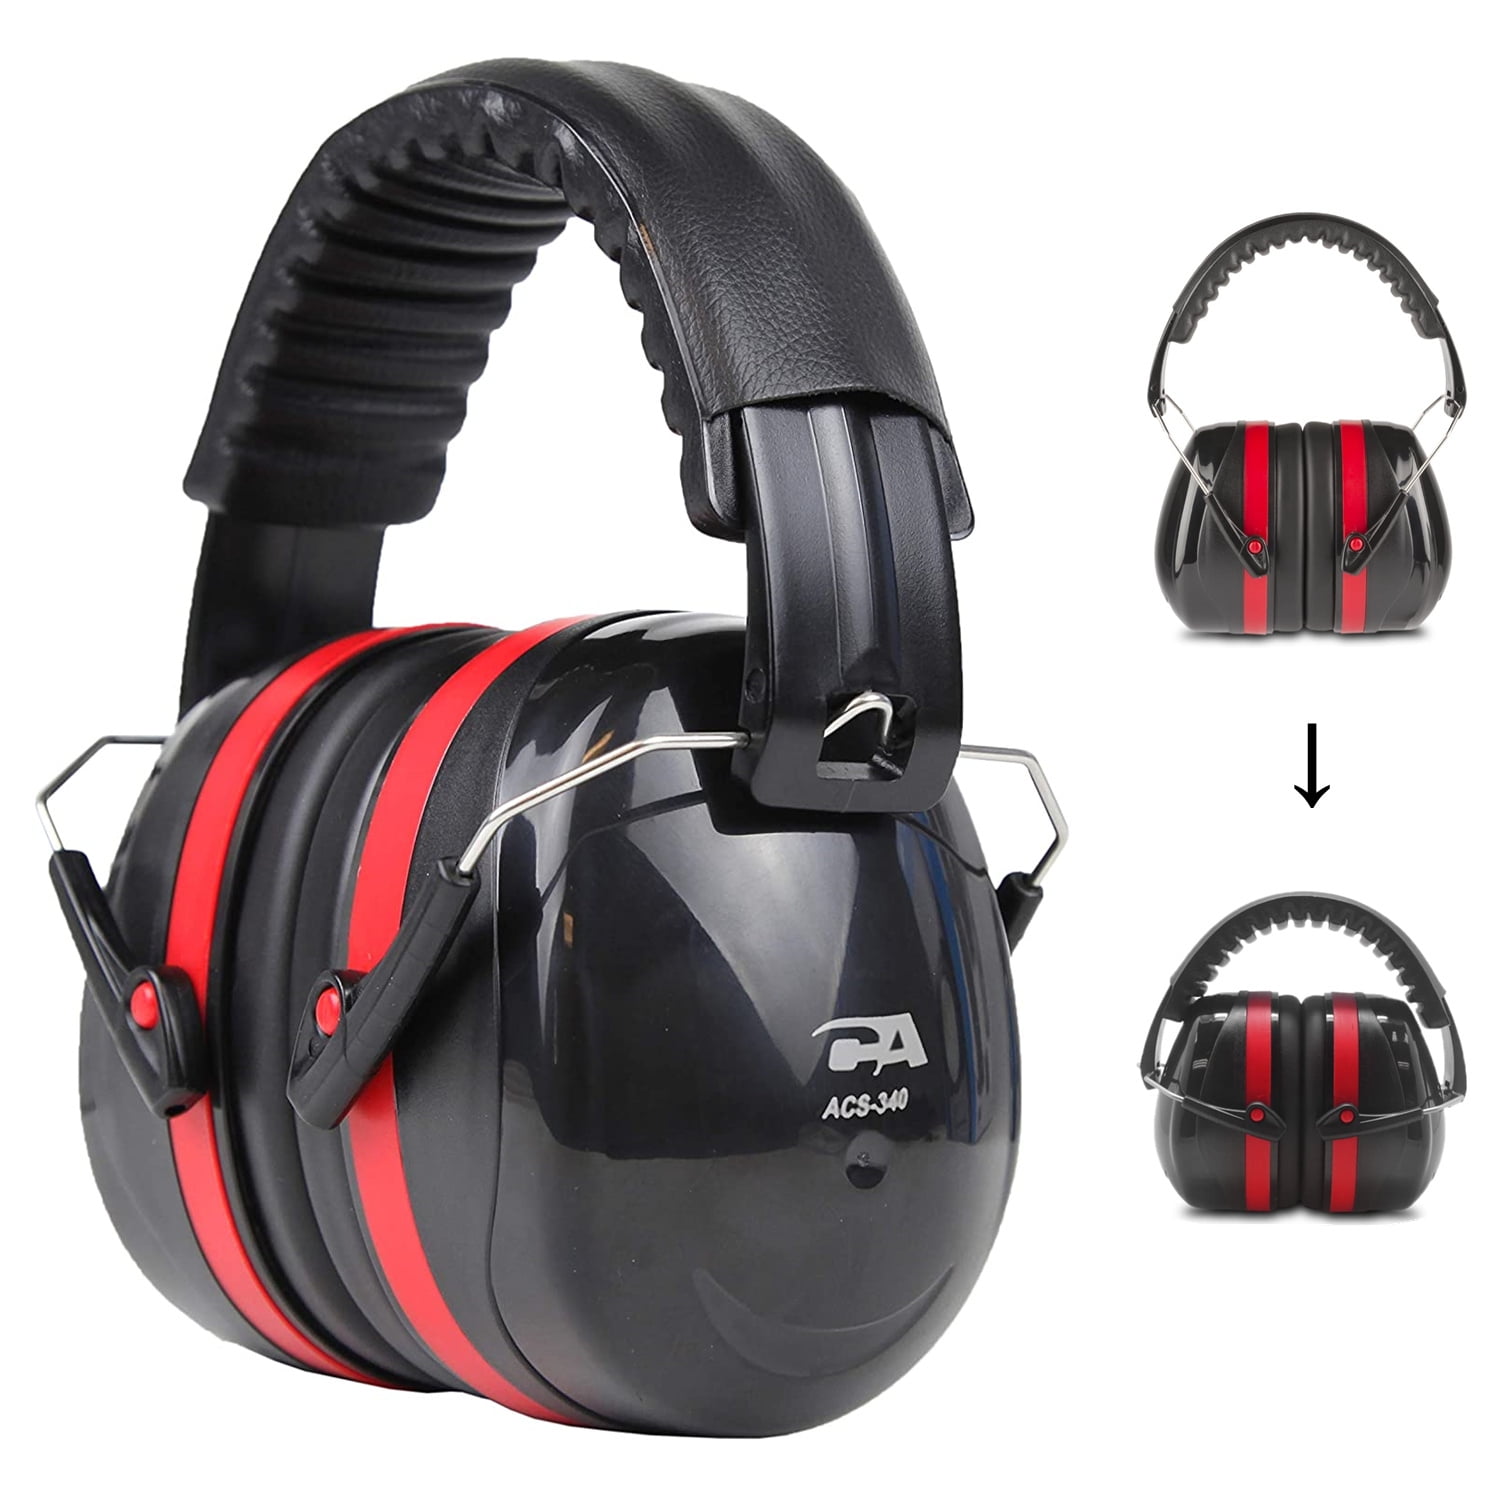 Kids Safety Ear Muffs NRR 26dB Noise Reduction Shooter Hearing Protection Muffs 